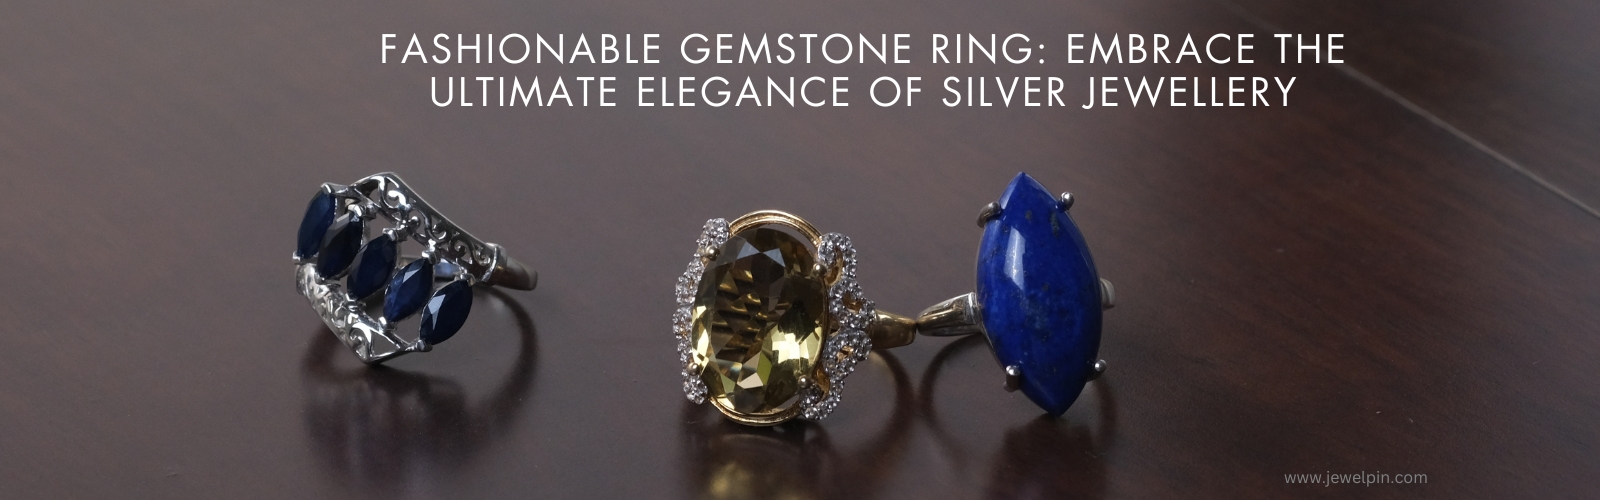 fashionable gemstone ring embrace the ultimate elegance of silver jewellery